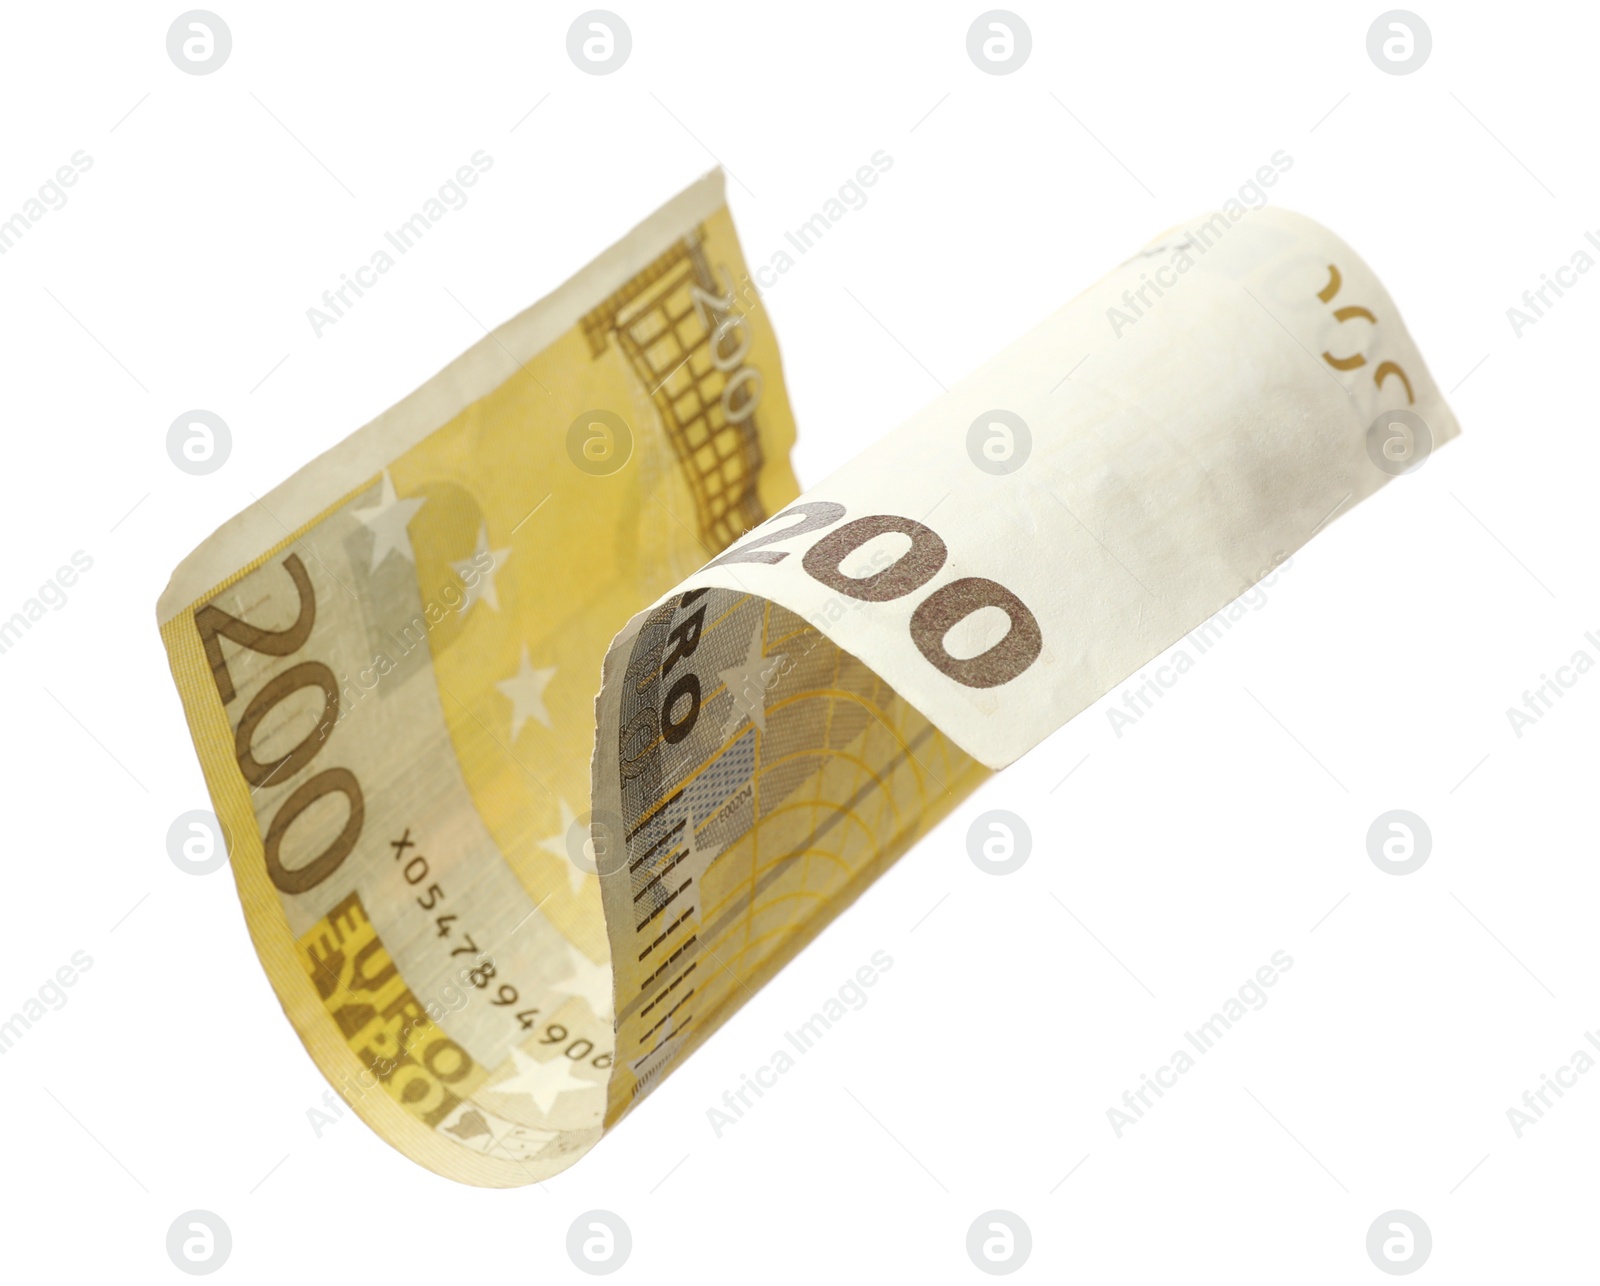 Photo of Flying two hundred Euro banknote isolated on white